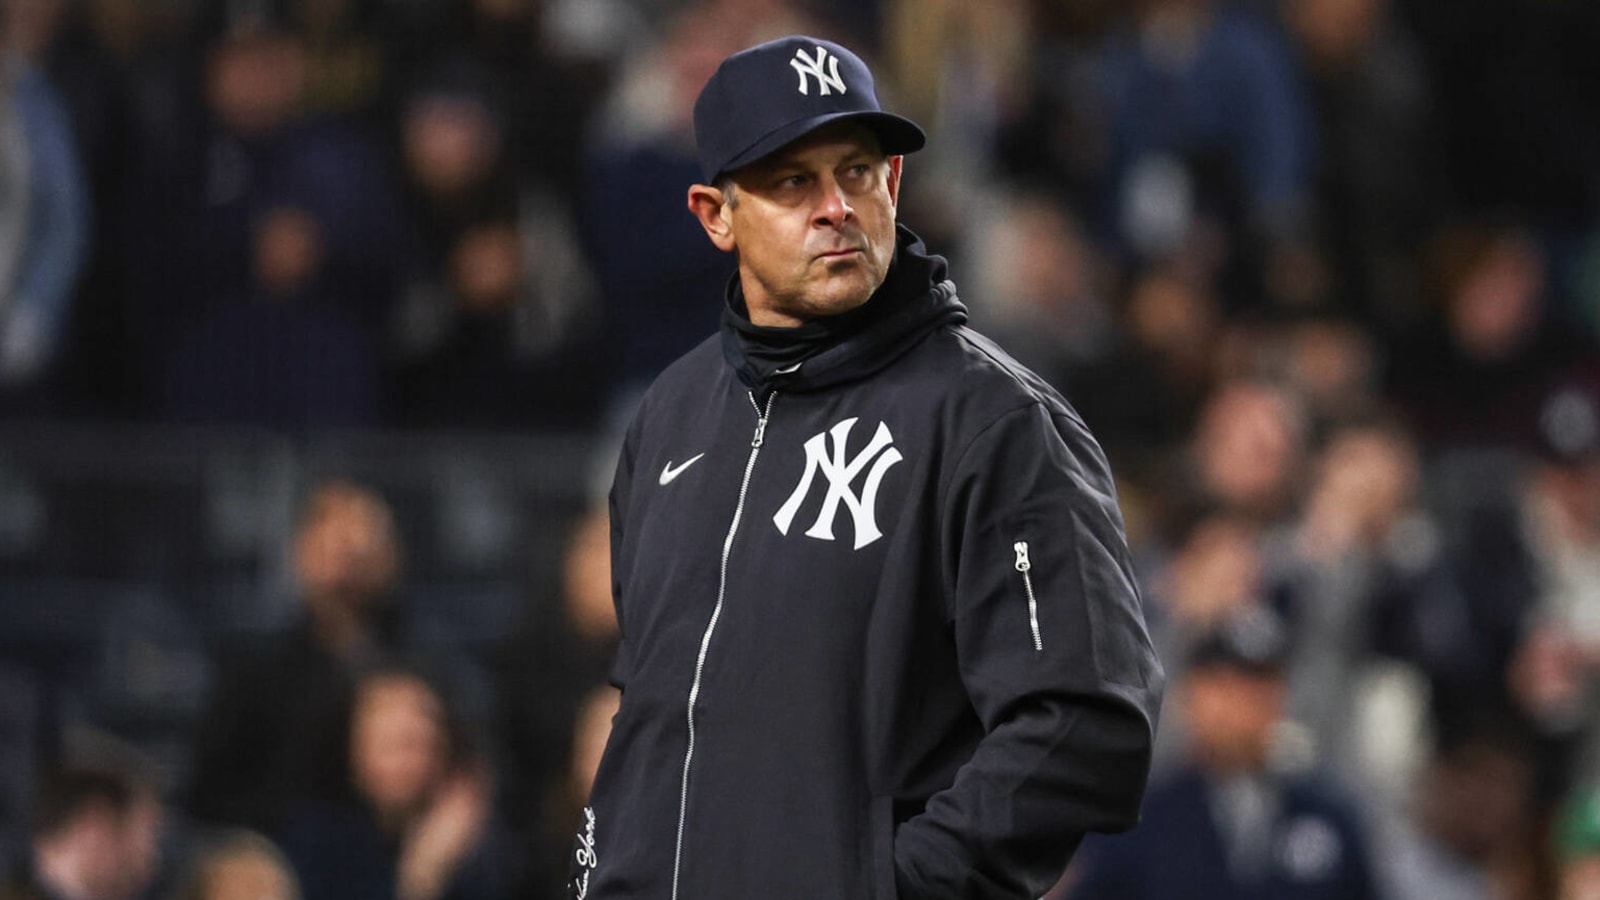 Yankees Manager Ejected in Bizarre Scene: Umpire Power and Miscommunication Under the Spotlight